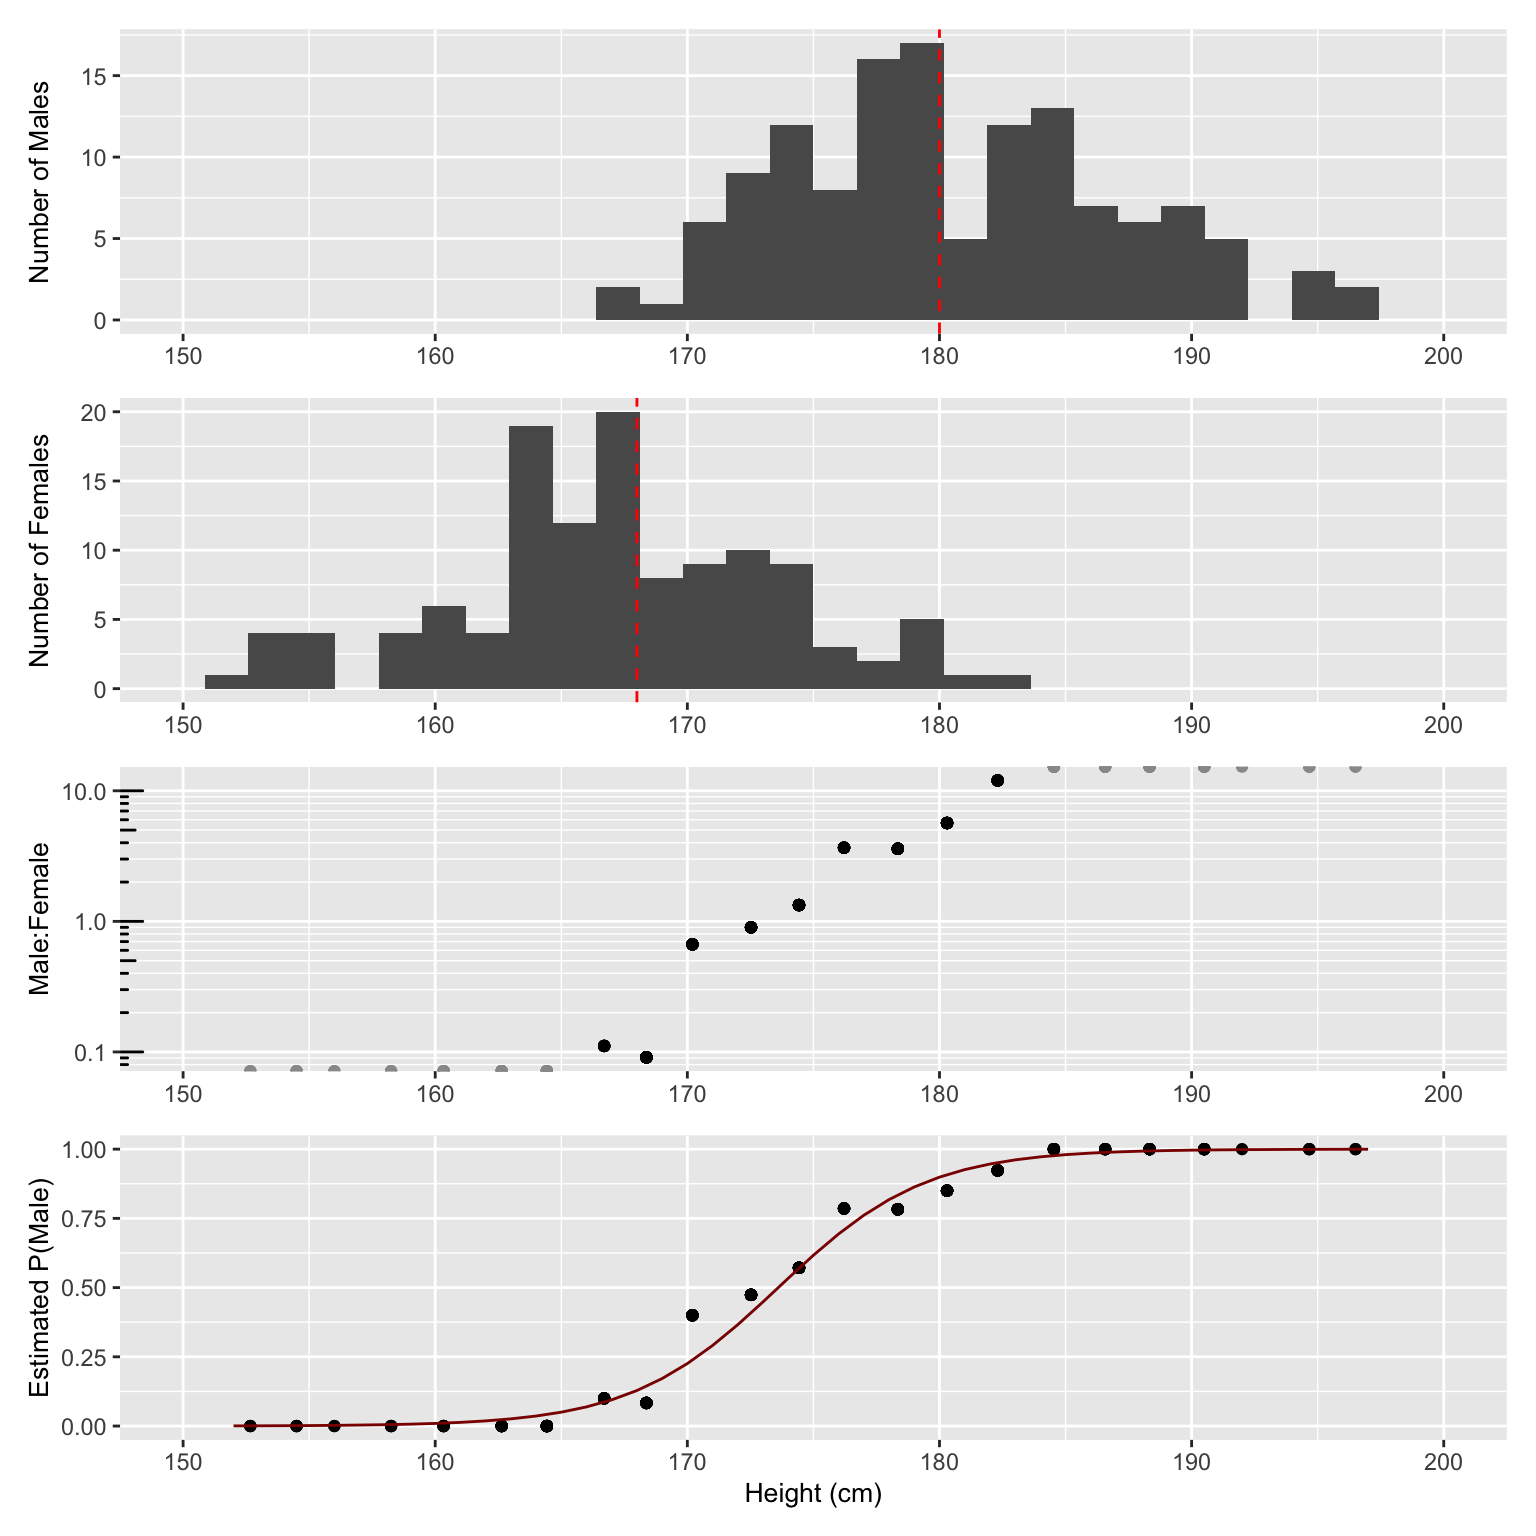 Overview of predicting sex from height. From top to bottom: distribution of heights for i) males and ii) females, iii) Male to female ratio in log-scale, and iv) proprotion of males (dots) along with logistic regression fit (red curve). Note that while 2-cm bins are used throughout the plot for visualization purposes, the logistic regression fit in contrast is performed on the raw data, i.e. sex (0/1) versus height.